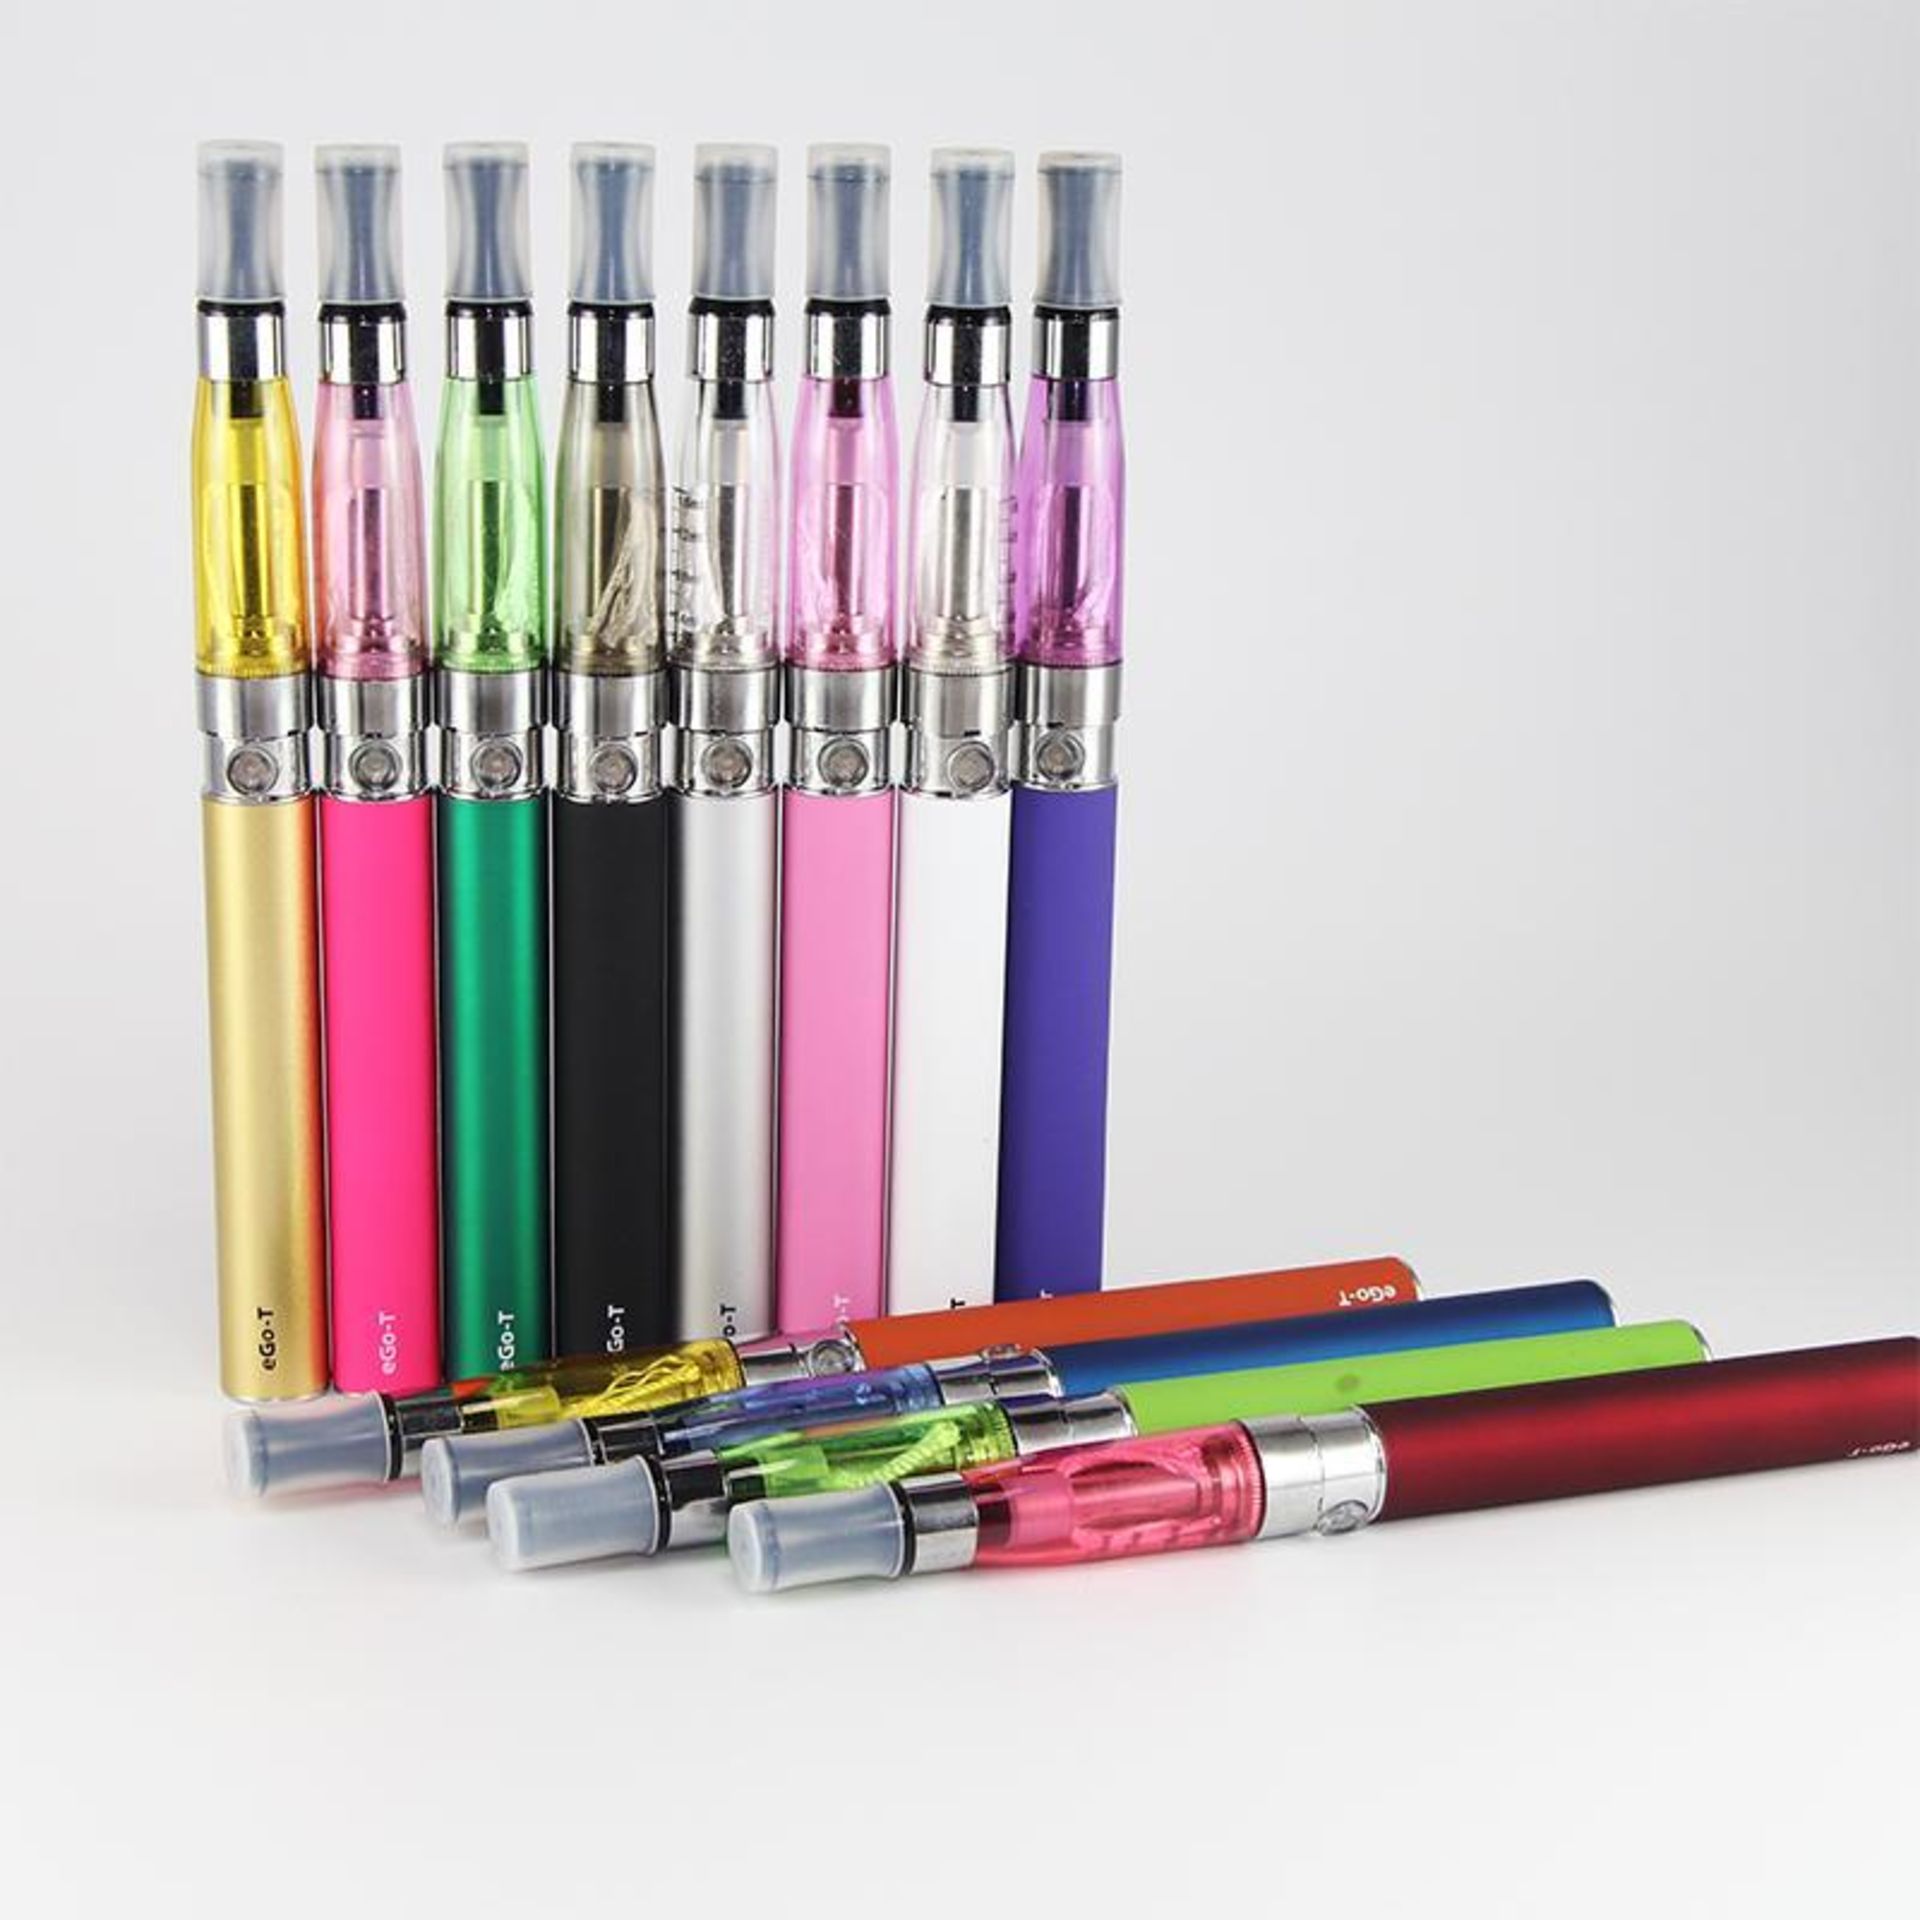 Grade A Electronic Cigarette Kit With Battery And USB Charger (Colours May Vary)